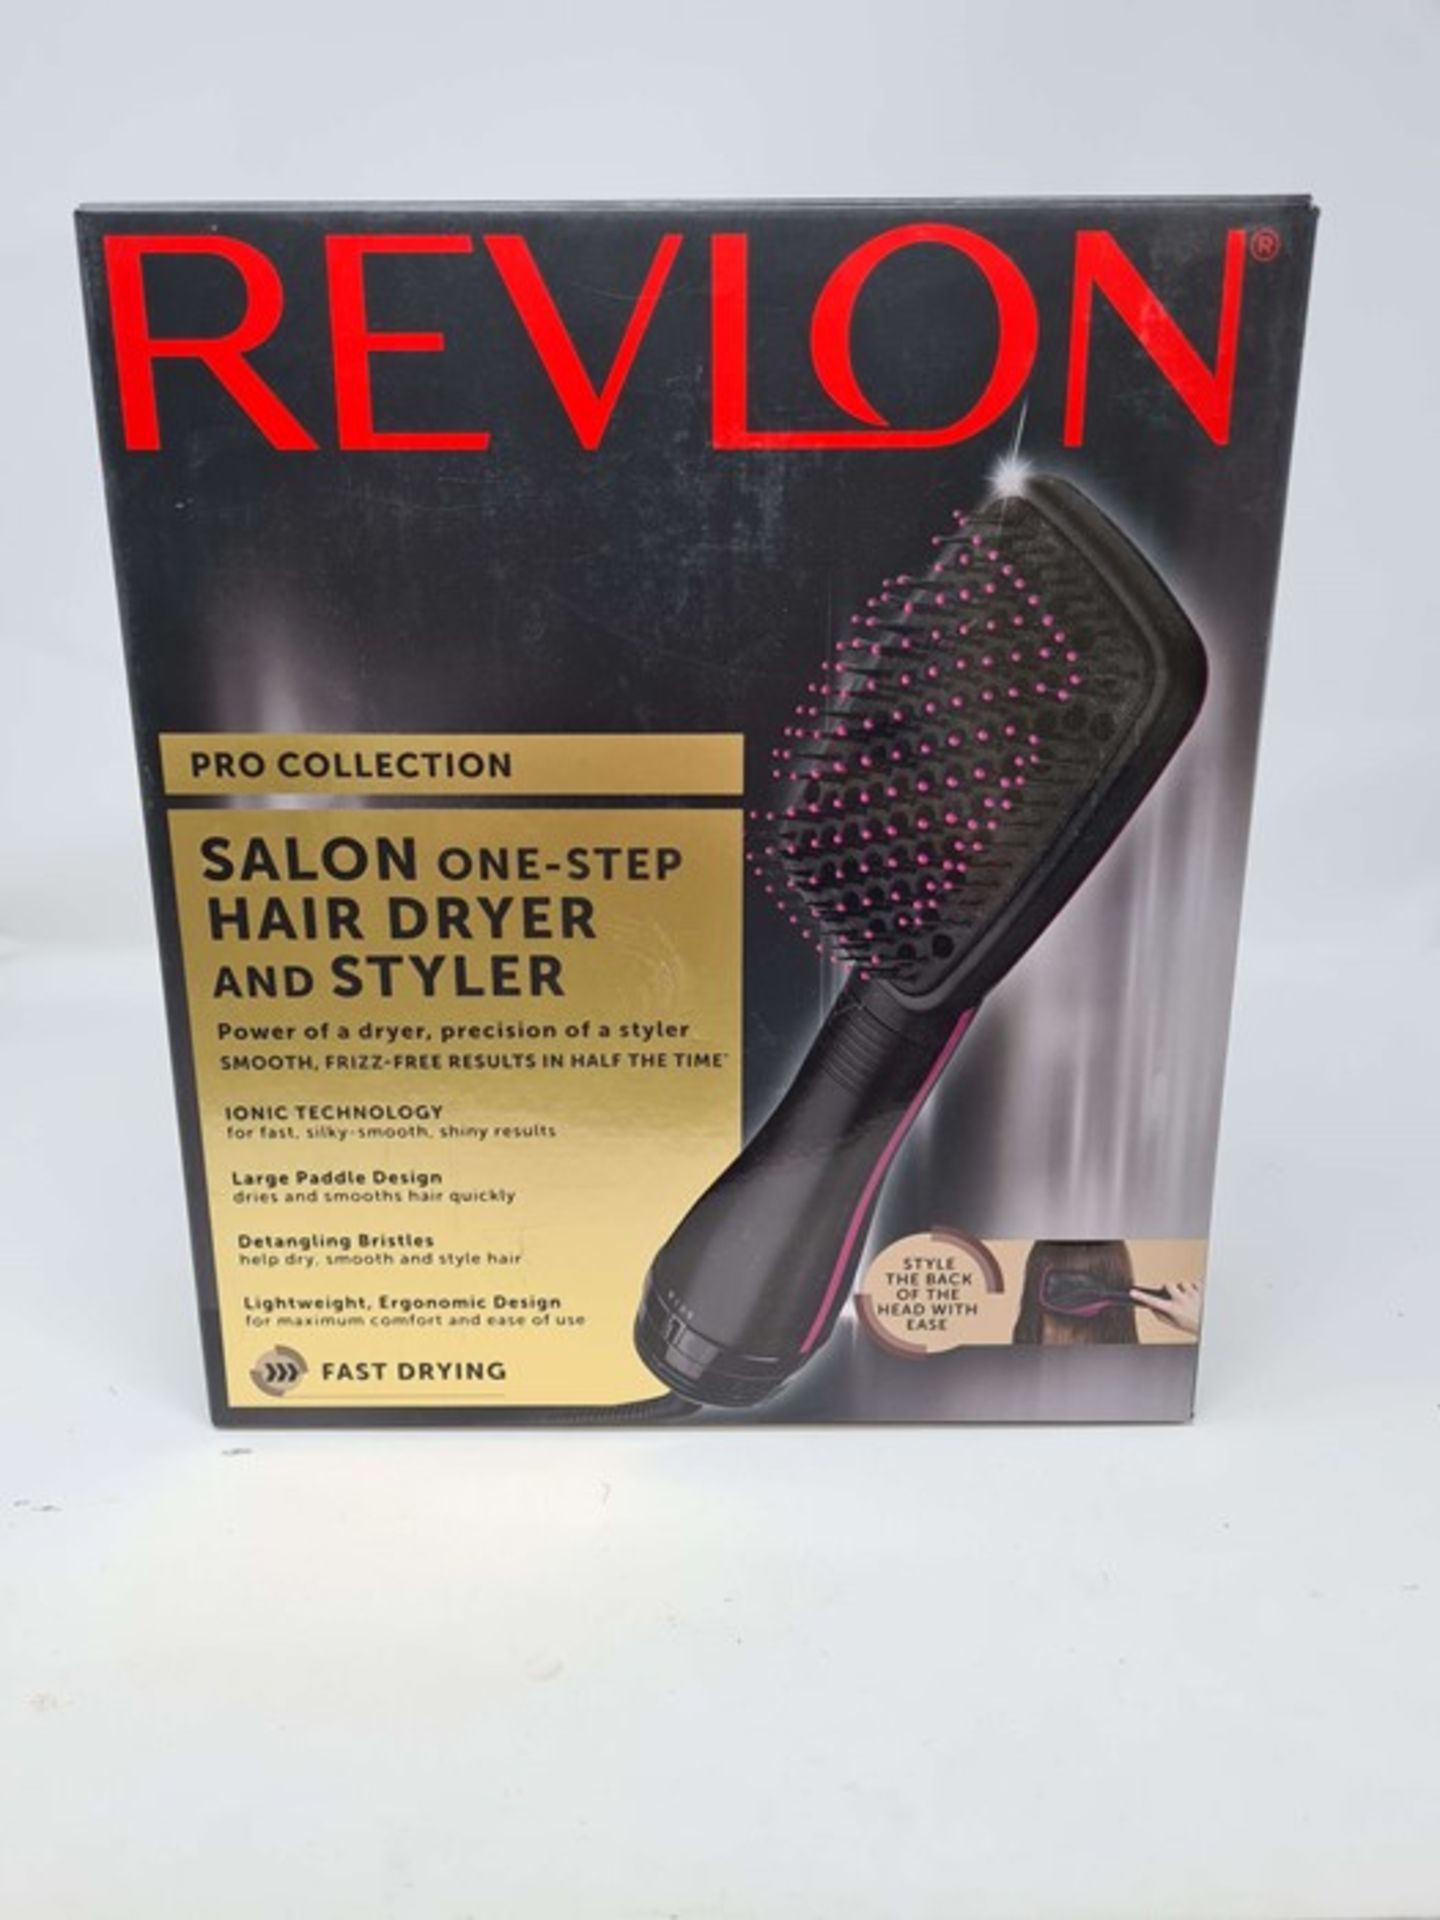 REVLON Pro Collection Salon One Step Hair Dryer - Image 2 of 2